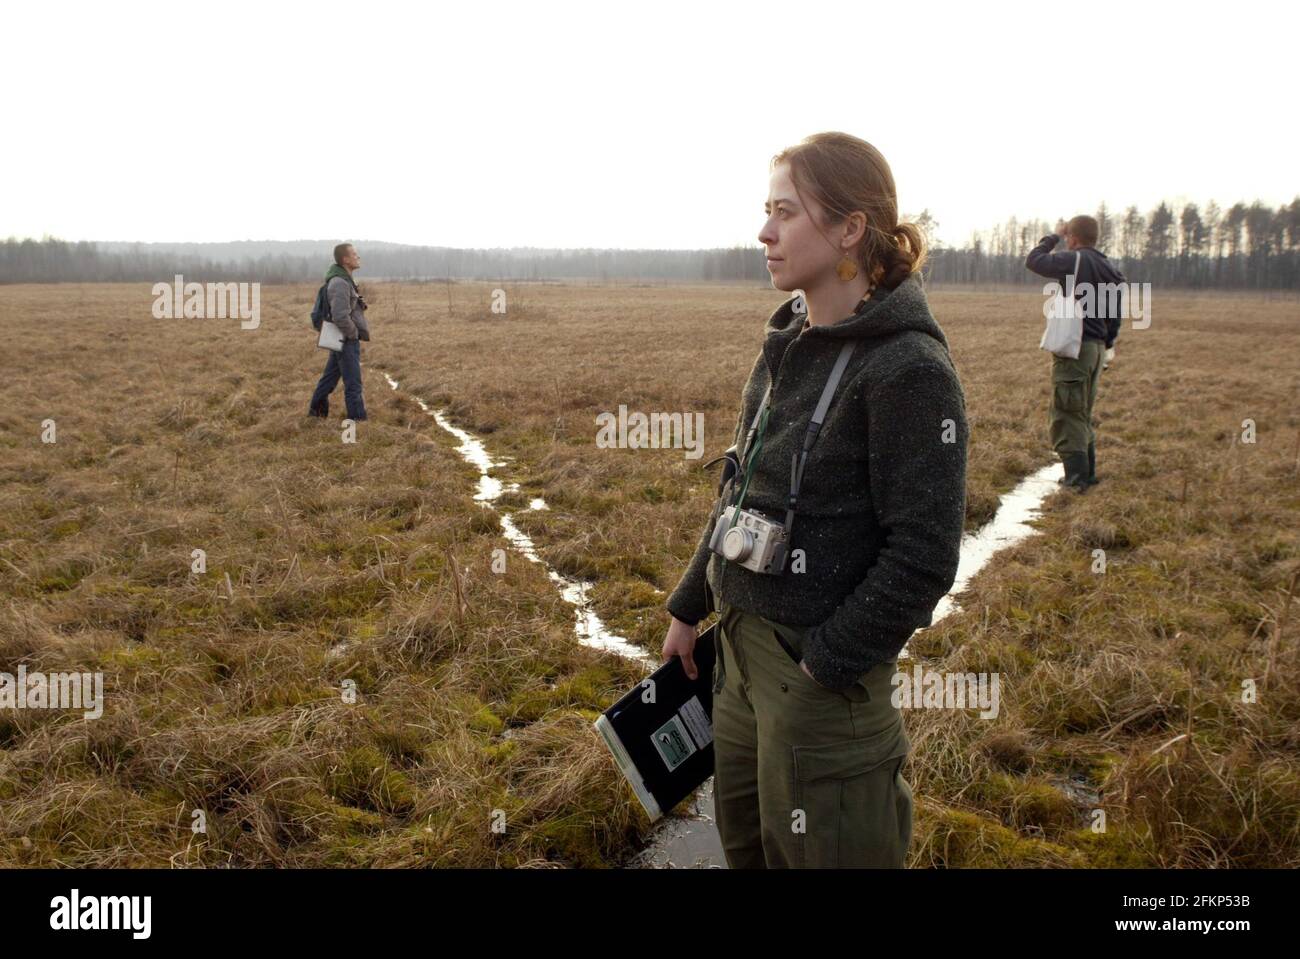 Gosia Znaniecka works for OTOP (polands society for the protection of birds on the wet lands of the Rospuda valley.  Plans to build a highway through Polands,  Rospuda Valley, a virtually untouched area of peatland on the border of Lithuania, have sparked a major controversy both in Poland and in Brussels with environmentalists warning it could have a catastrophic effect on local wildlife. The Via Baltica road aims to link the Baltic states to Scandinavia and will make trade easier between the two regions   pic David Sandison Stock Photo